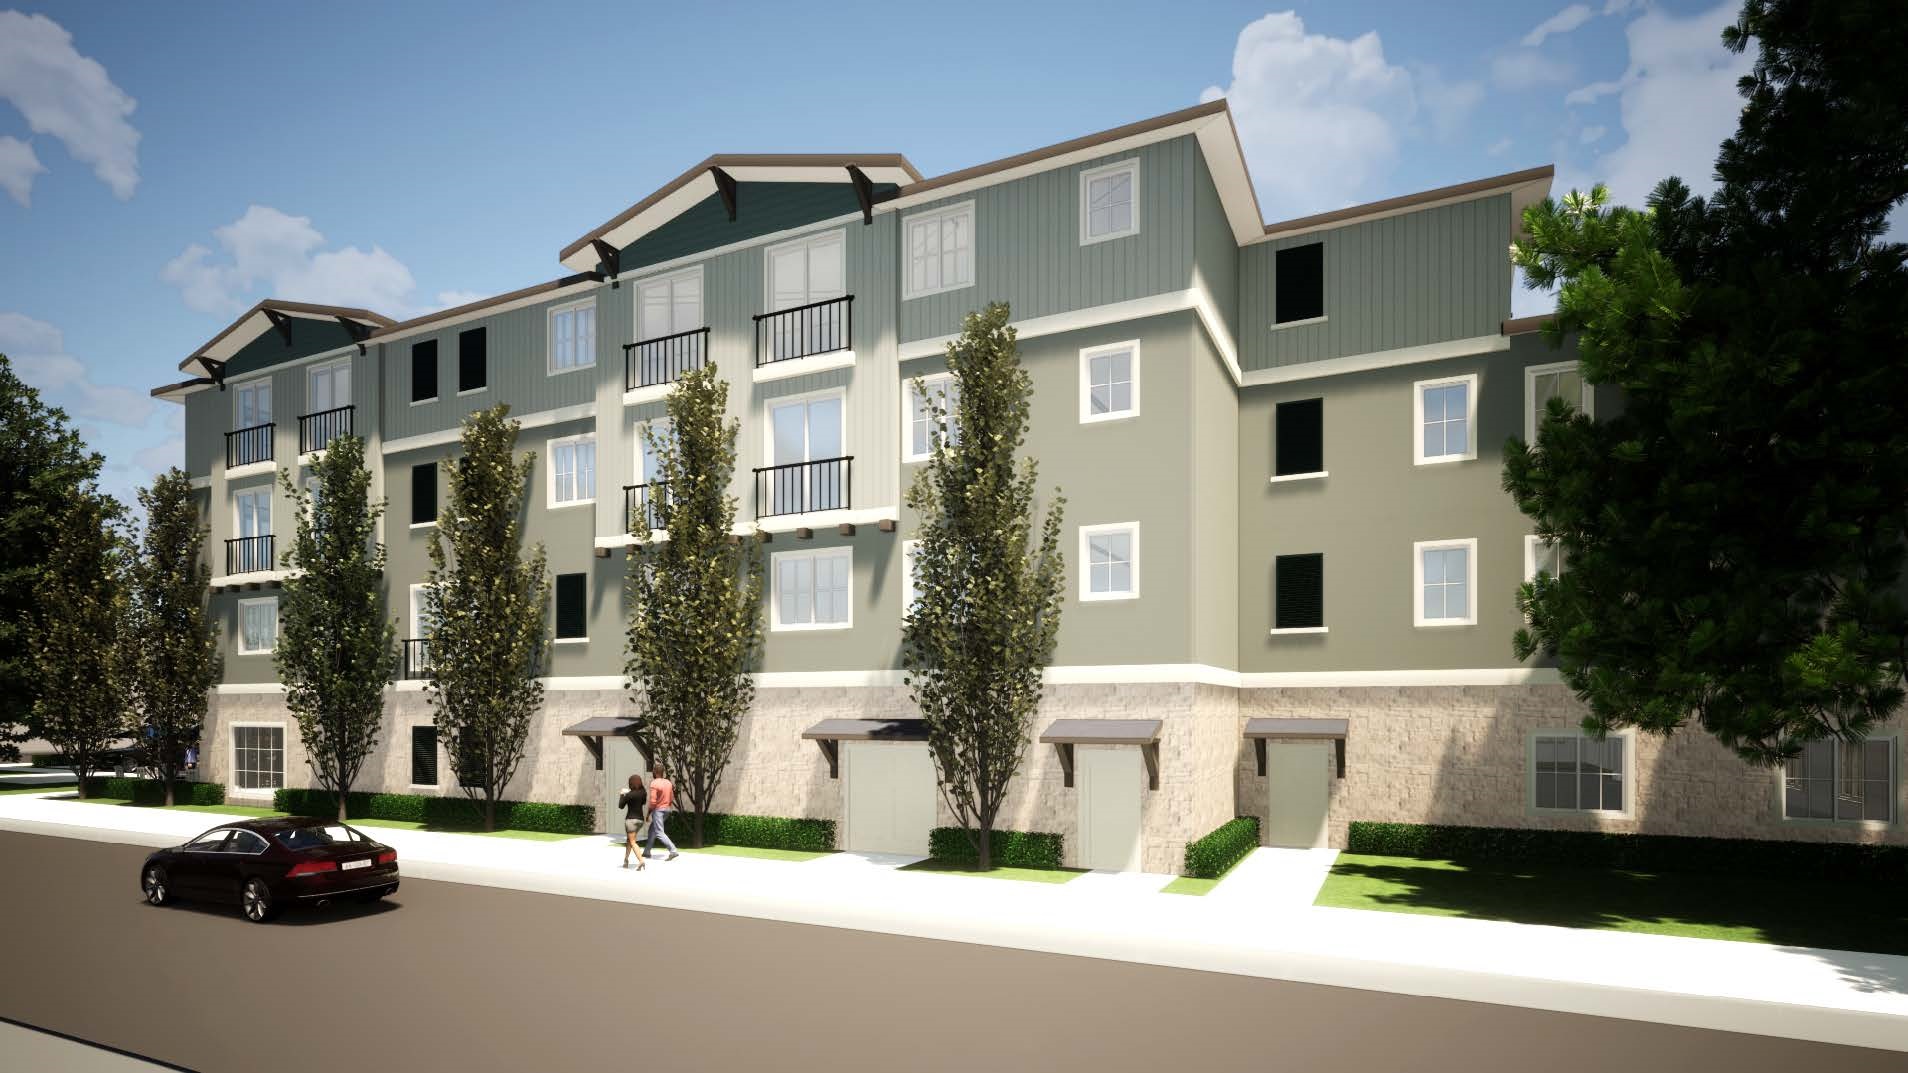 A rendering of a proposed Capitola Road senior living facility. The building would be four stories tall.